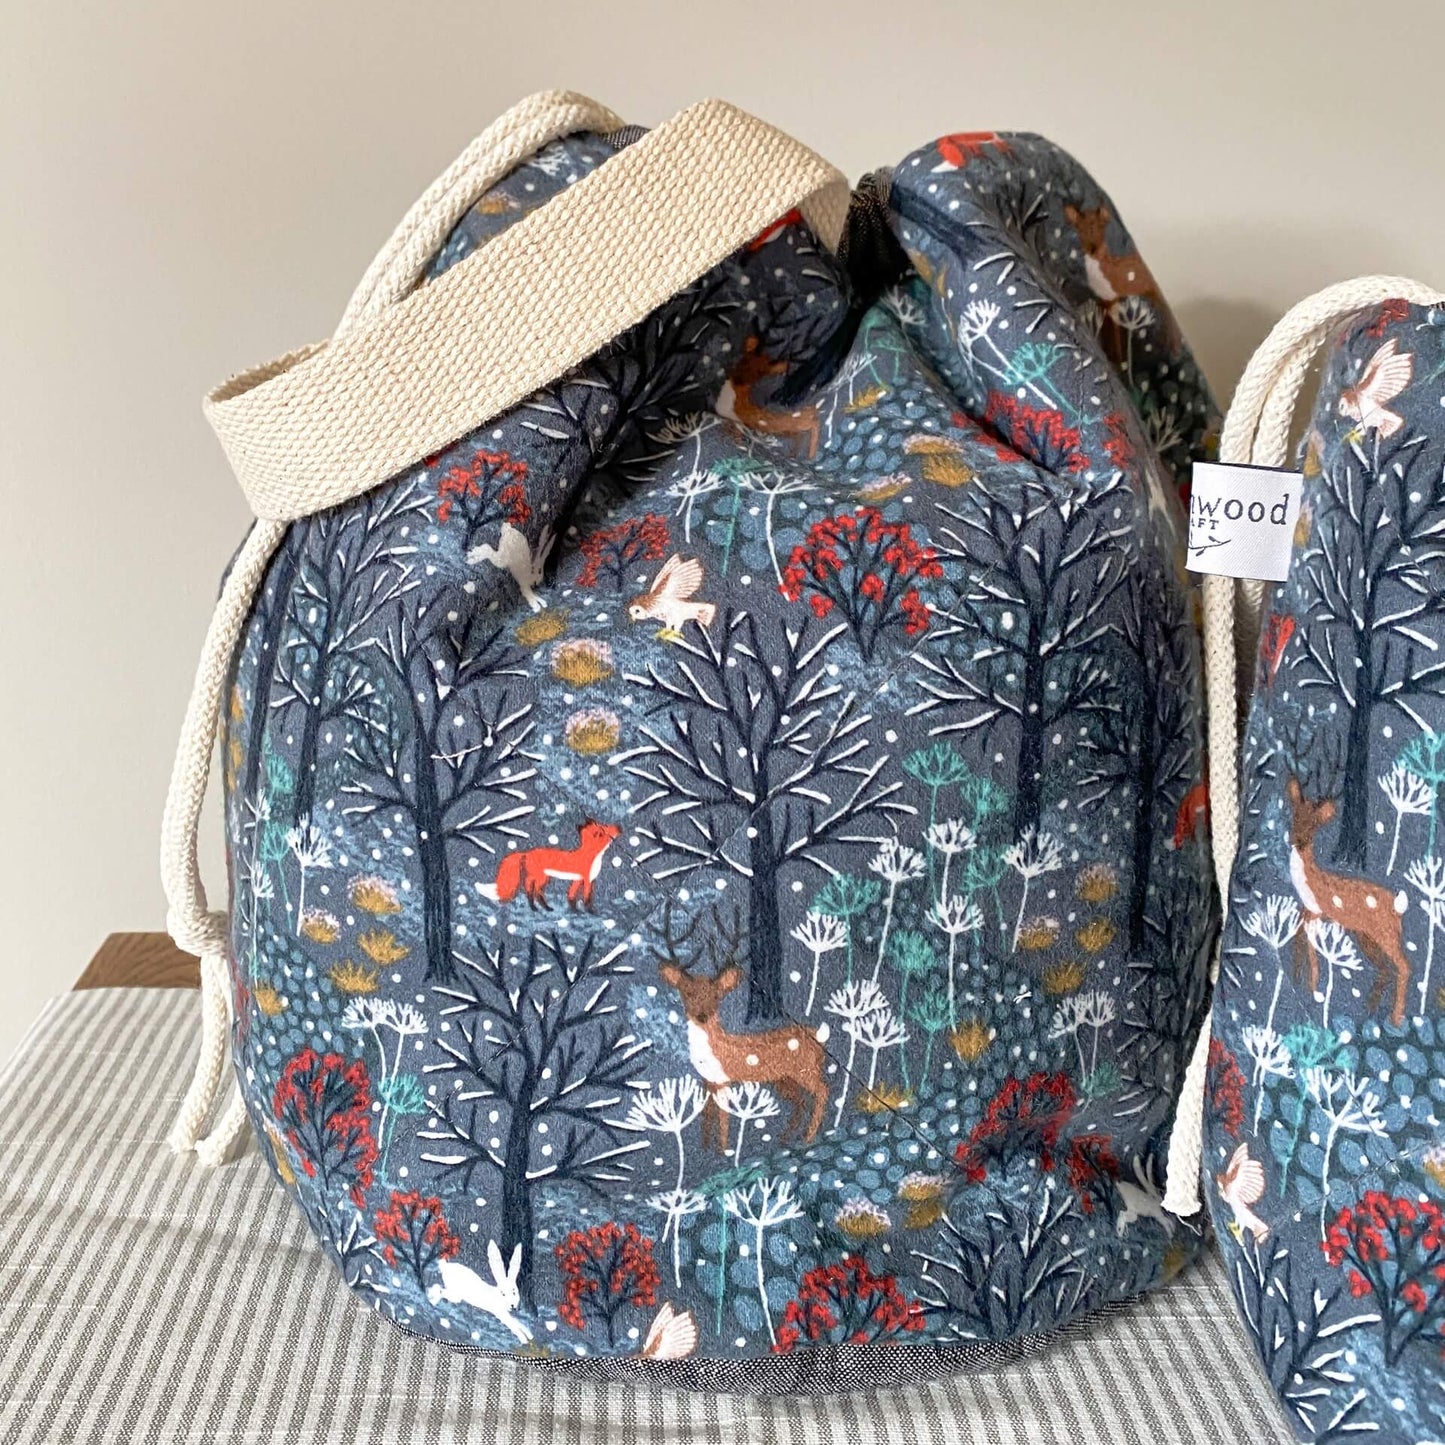 A close up picture of a project bag hand made using a winter woodland scene fabric. The fabric has a wintery grey background and shows off snowy trees, owls, rabbits, deer and foxes. The bag has a handle and drawstrings. 